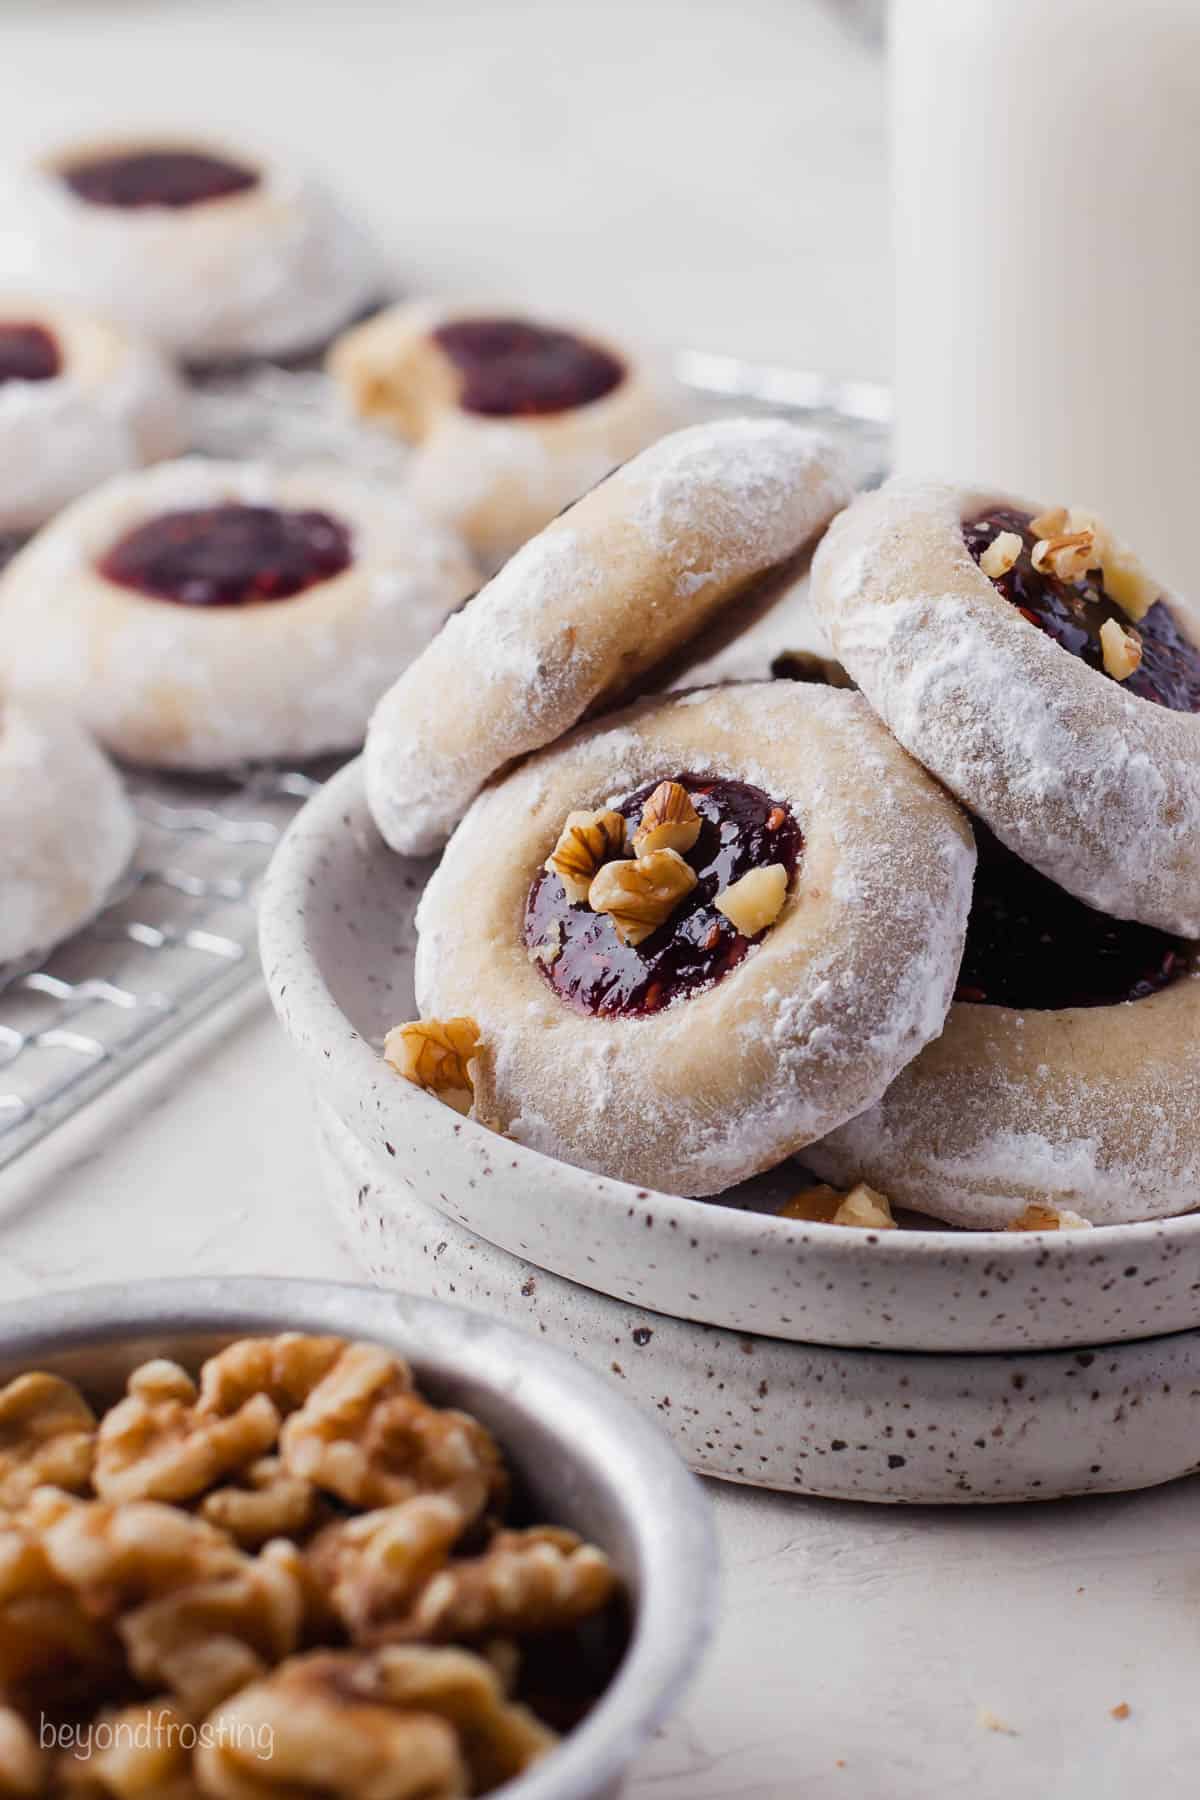 Jam-filled thumbprint cookies piled into a plate with a bowl of walnuts in the foreground